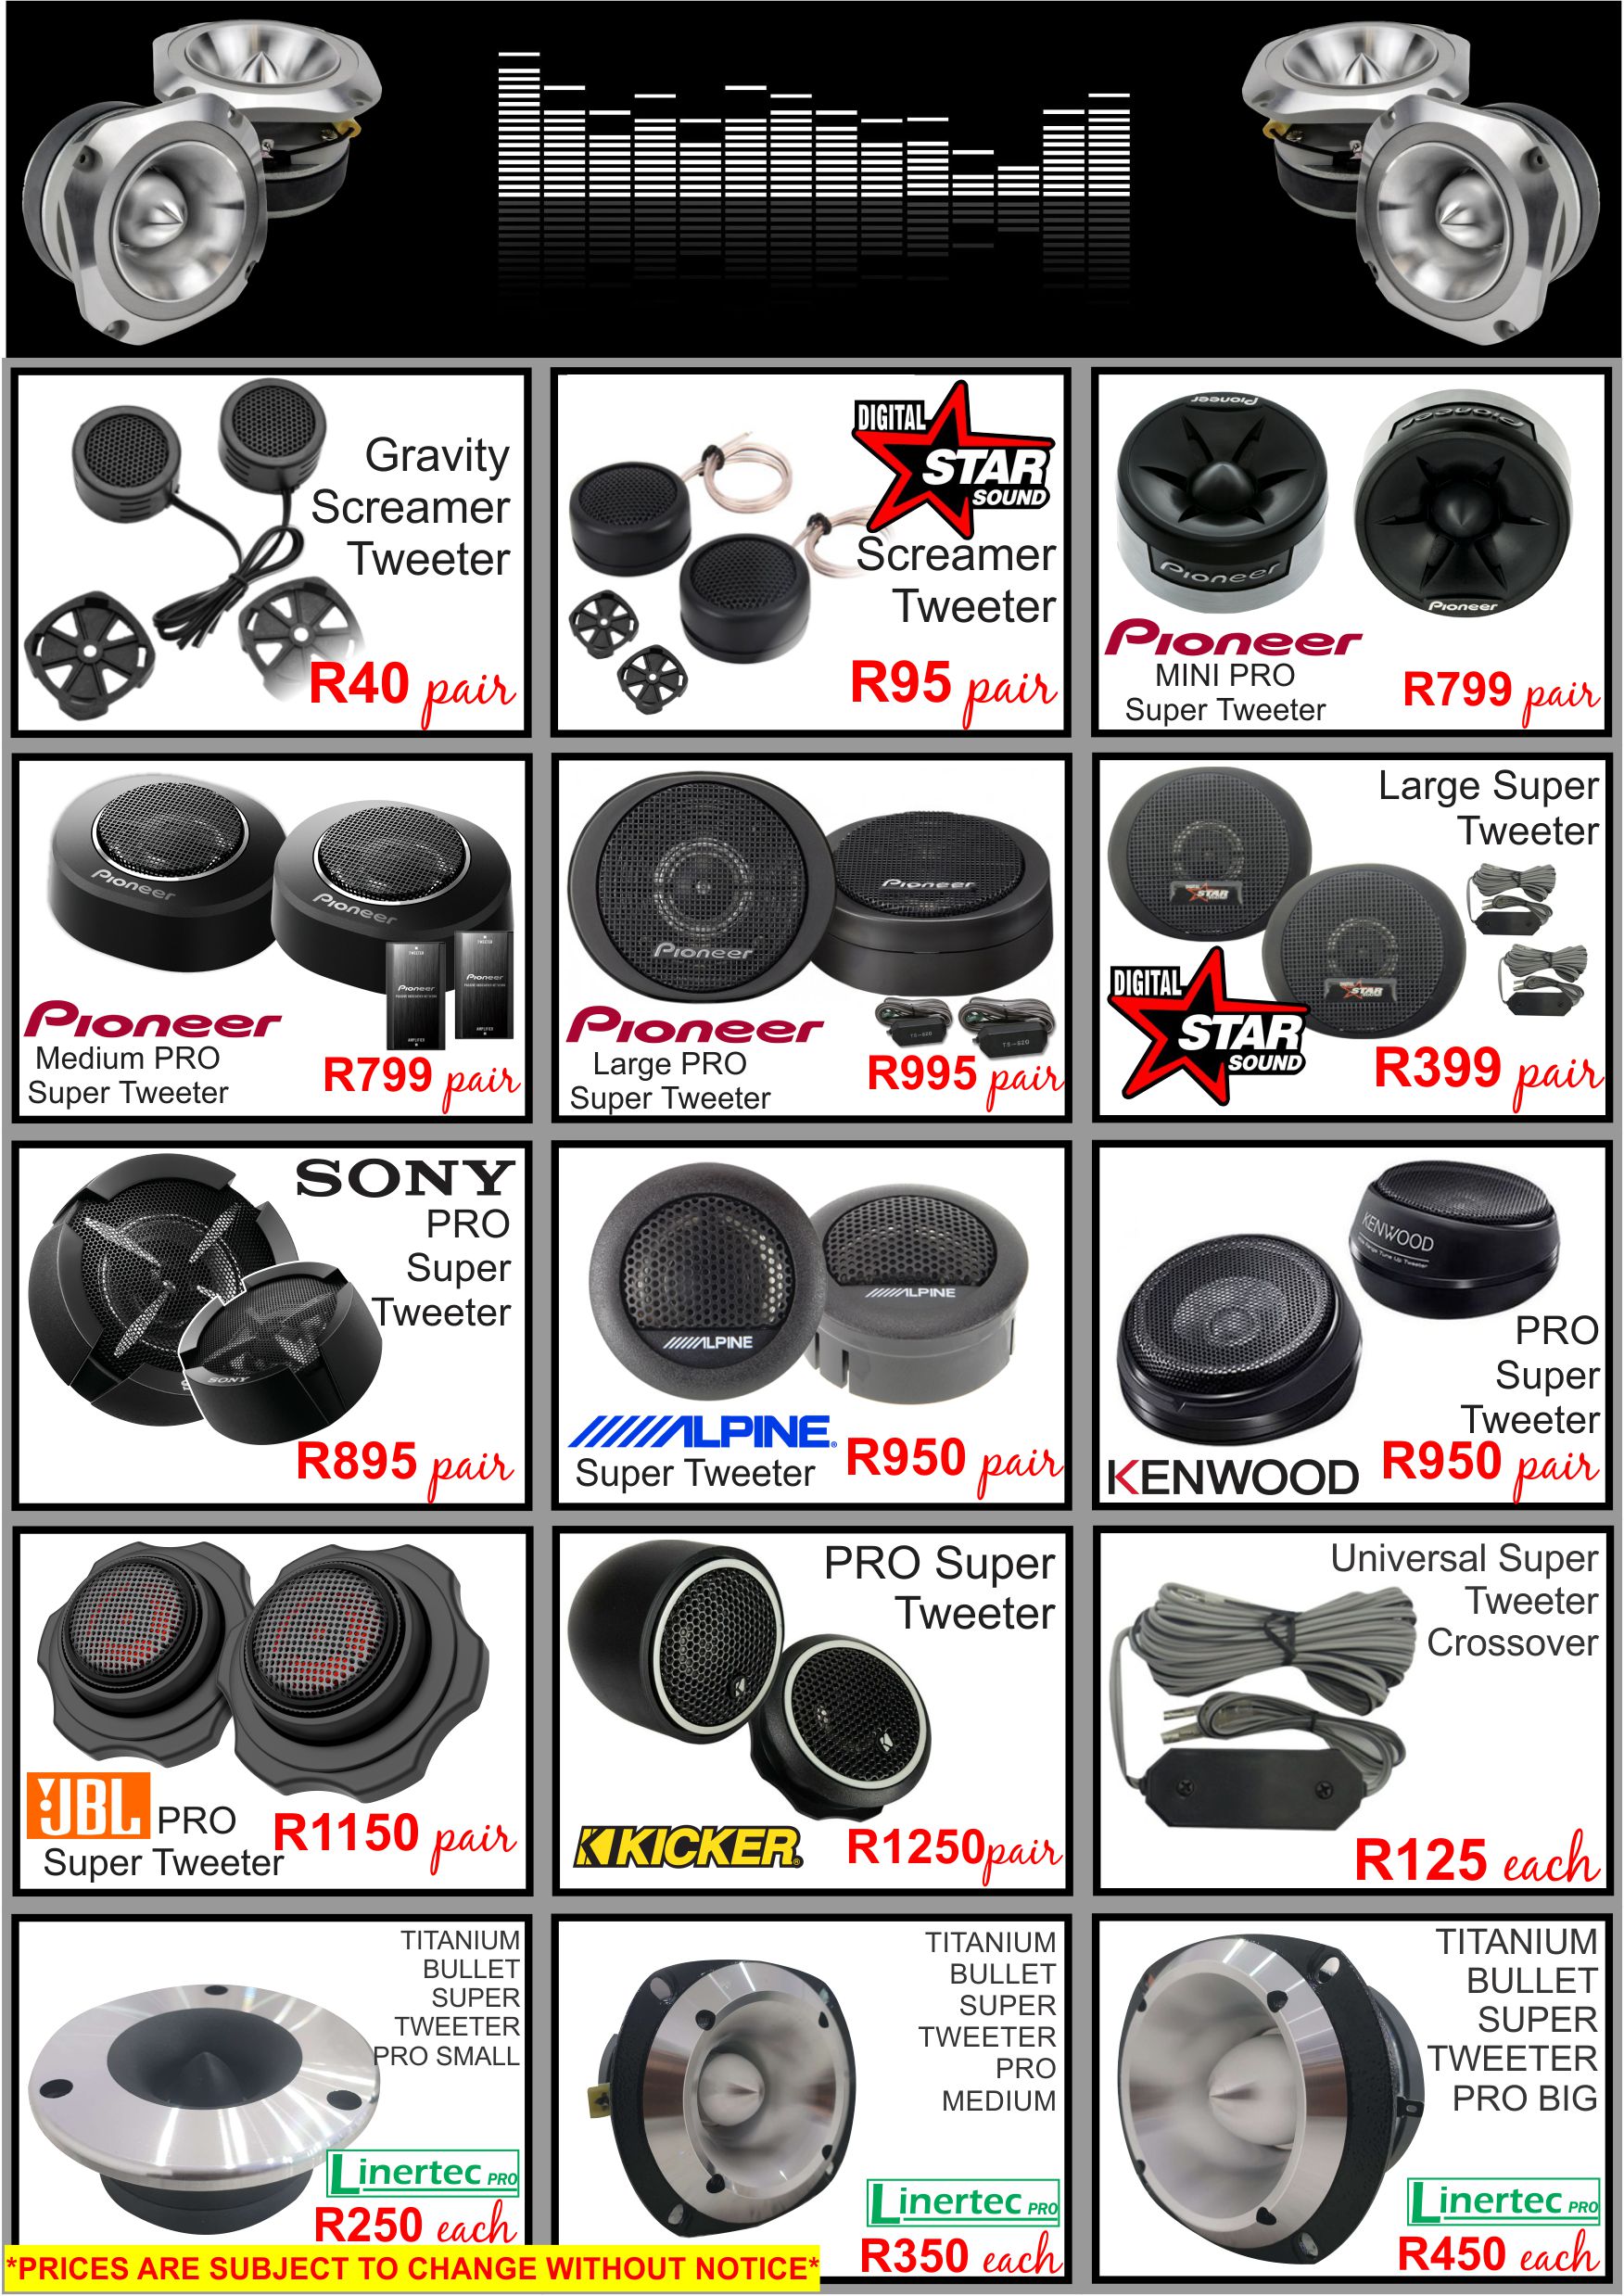 car audio combo , car audio equipment , sony , pioneer ,jvc , kicker , targa , xtc , jbl . starsound  | car audio durban | car audio fitment durban | dj sound durban | disco dj pa equipment durban | disco dj lighting durban | dj mixer durban | dj power amp durban | tv box durban | air mouse durban | behringer durban | gravity sound and lighting warehouse durban | dj smoke achine durban | dj smoke fluid durban | disco dj lighting durban | disco dj led lighting durban | disco dj lazer lighting durban | car amps durban | car decks durban | car bluetooth decks durban | car van double dins durban | car subs durban | starsound grey cones subwoofers durban | Car accessories durban | disco dj party combos durban | J EQUIPMENT | DISCO DJ LIGHTING | DJ/PA COMBO PACKAGES | MULITIMEDIA | MOBILE DISCO-DJ FOR HIRE  SOUND EQUIPMENT HIRE | PROJECTOR AND SCREEN FOR HIRE | ELECTRONIC REPAIR CENTRE  GHD HAIR IRON REPIARS-CLOUD NINE | PUBLIC ADDRESS SYSTEMS | PA DESK MIXERS  SANITIZER FOGGING MACHINES | POWER AMPLIFER | CROSSOVER / EQUALIZER | DISCO / PA SPEAKERS  HOME THEATRE SYSTEMS | SANITIZER SMOKE MACHINE | DJ MIXERS | DJ ACCESSORIES  DJ CD / MP3 PLAYERS / MIDI CONTROLLERS | DISCO BOXES | MICROPHONES | CAR AUDIO | CAR AUDIO FITMENT  SANITIZER THERMAL FOGGER MACHINES | CAR ACCESSORIES | CAR SPEAKERS | CAR AMPLIFIERS | CAR SOUND FITMENT  MARINE AUDIO |DISCO LIGHTING FOR HIRE ,SOUND EQUIPMENT FOR HIRE ,PROJECTOR / SCREEN / STAGE FOR HIRE ,COLOUR WASH HIRE,MOOD LIGHTING HIRE ,INTELLIGENT LIGHTING HIRE , OUTDOOR LANTERN HIRE , DJ SOUND FOR HIRE , CONFETTI HIRE , ROSE PETAL HIRE , SMOKE MACHINE HIRE , UV LIGHITNG HIRE DURBAN , SOUND AND LIGHTING HIRE DURBAN    